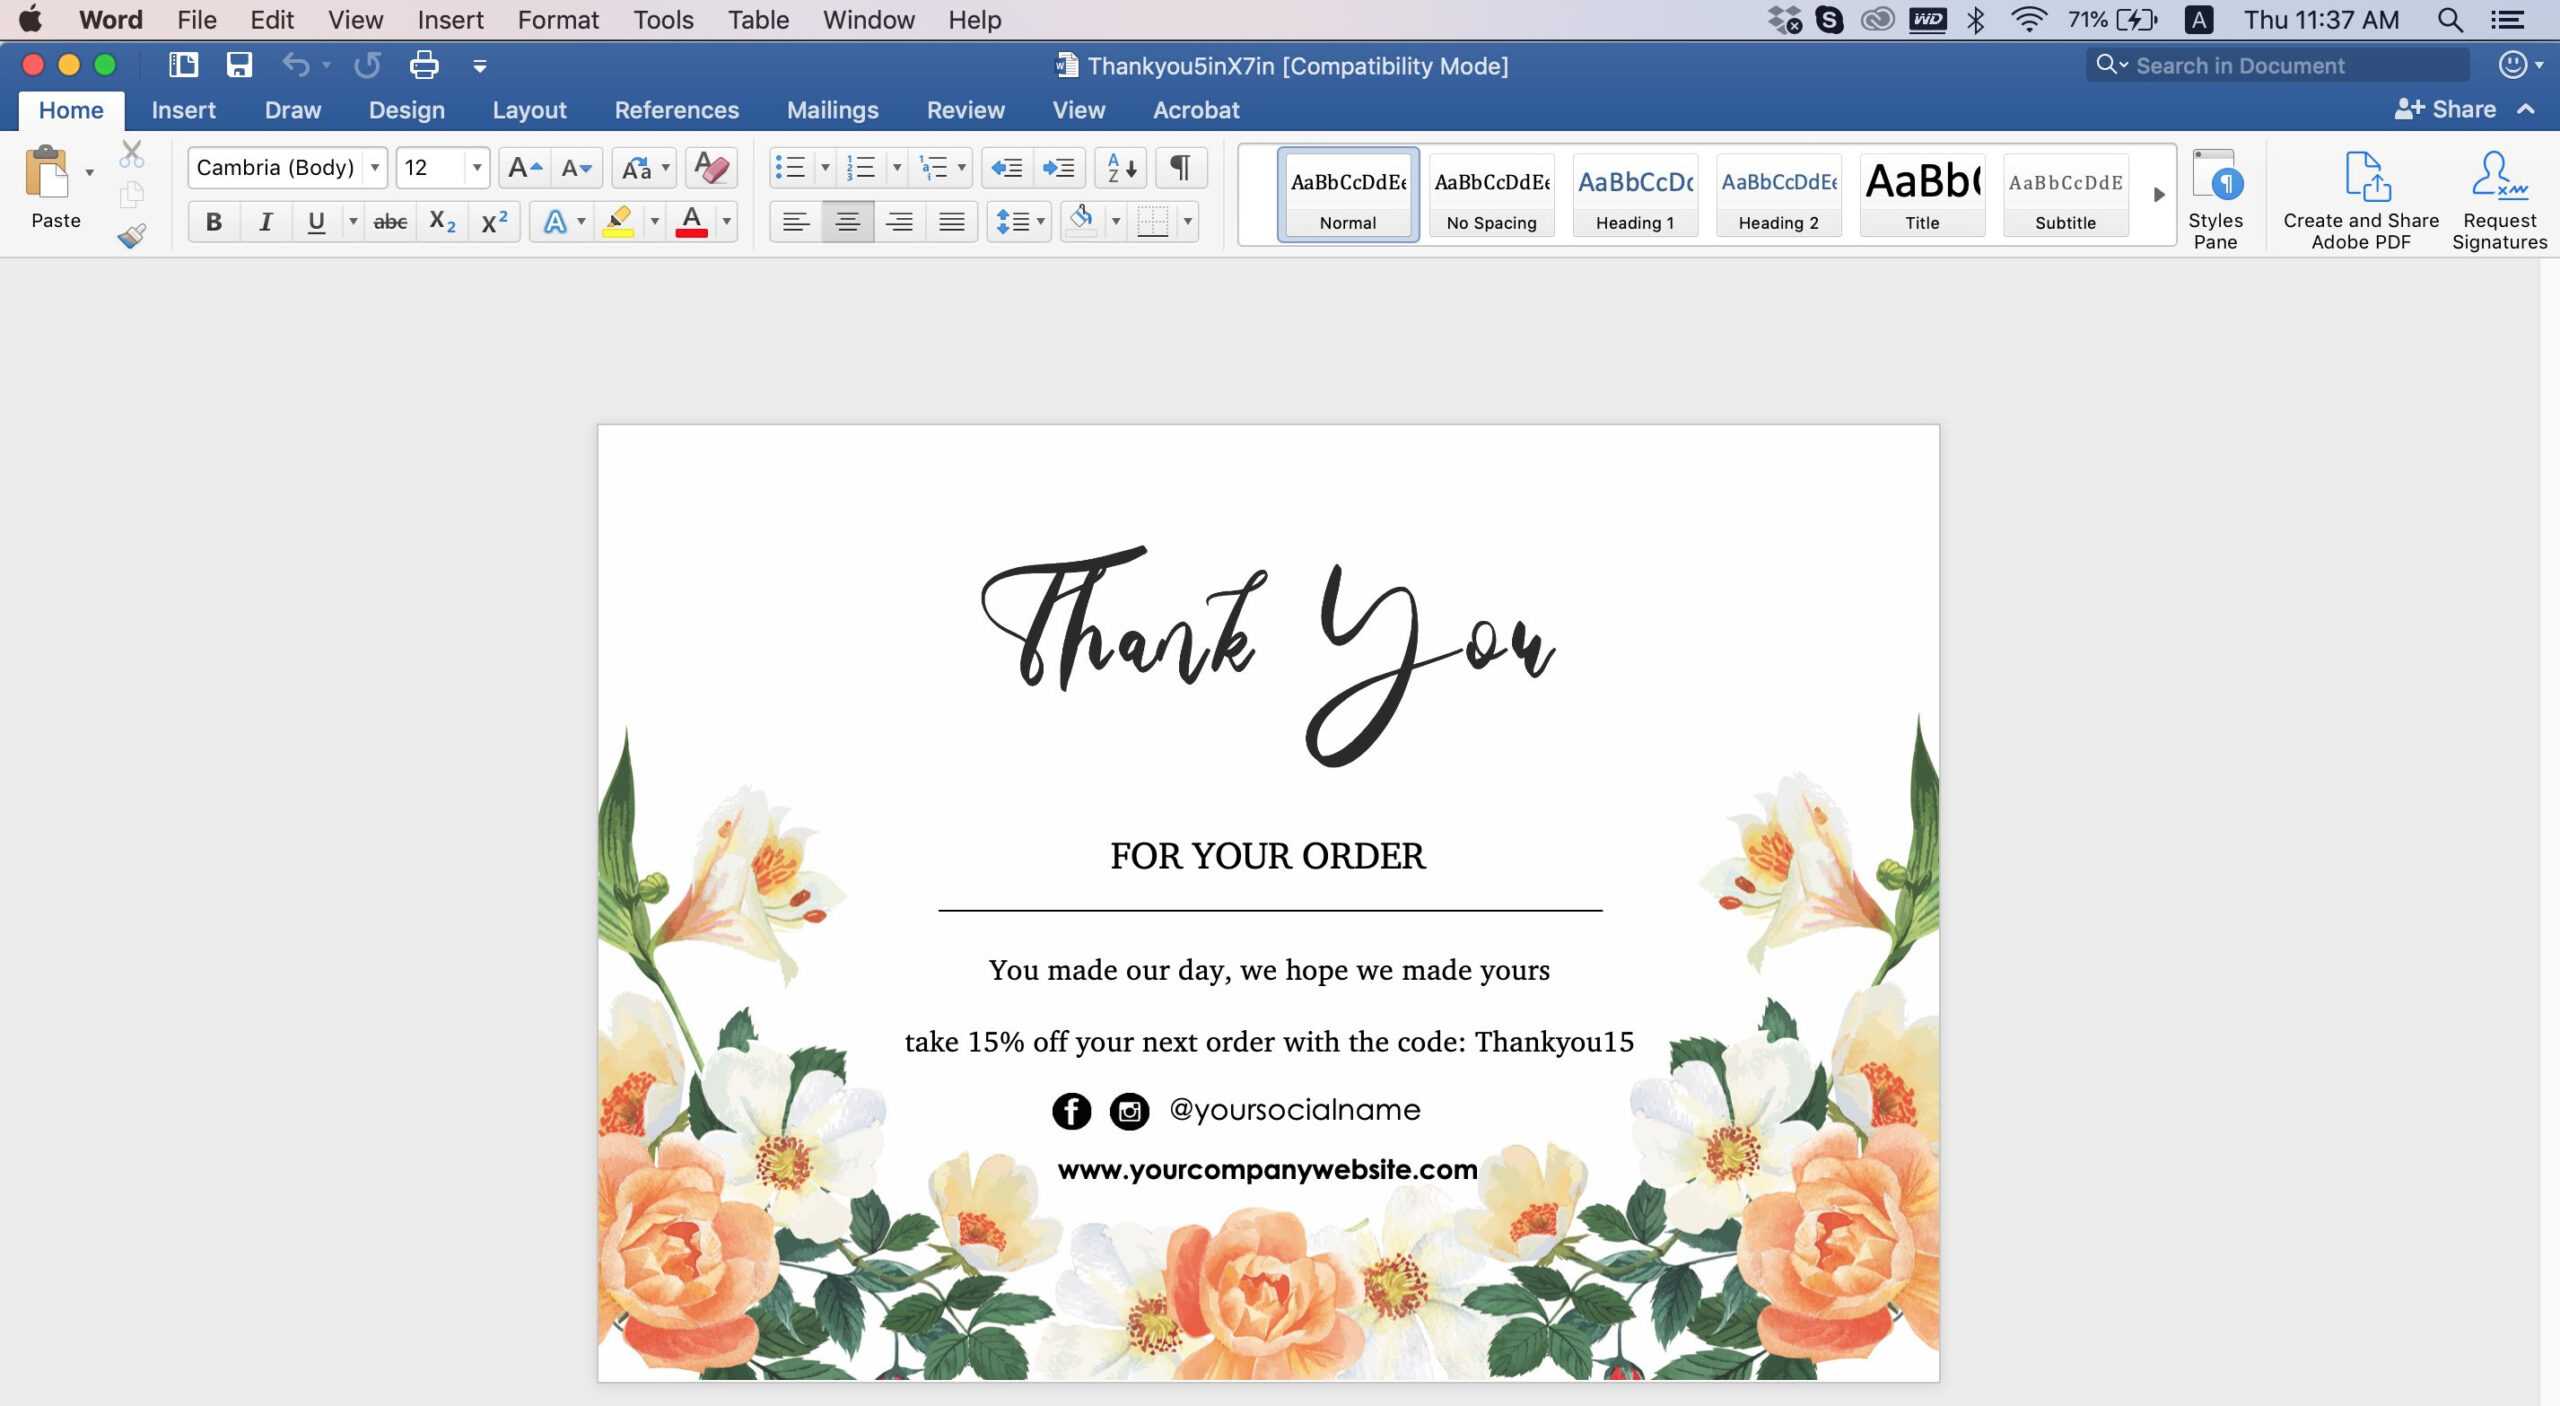 009 Editable Thank You Post Card Template Word Top Ideas Intended For Thank You Card Template Word